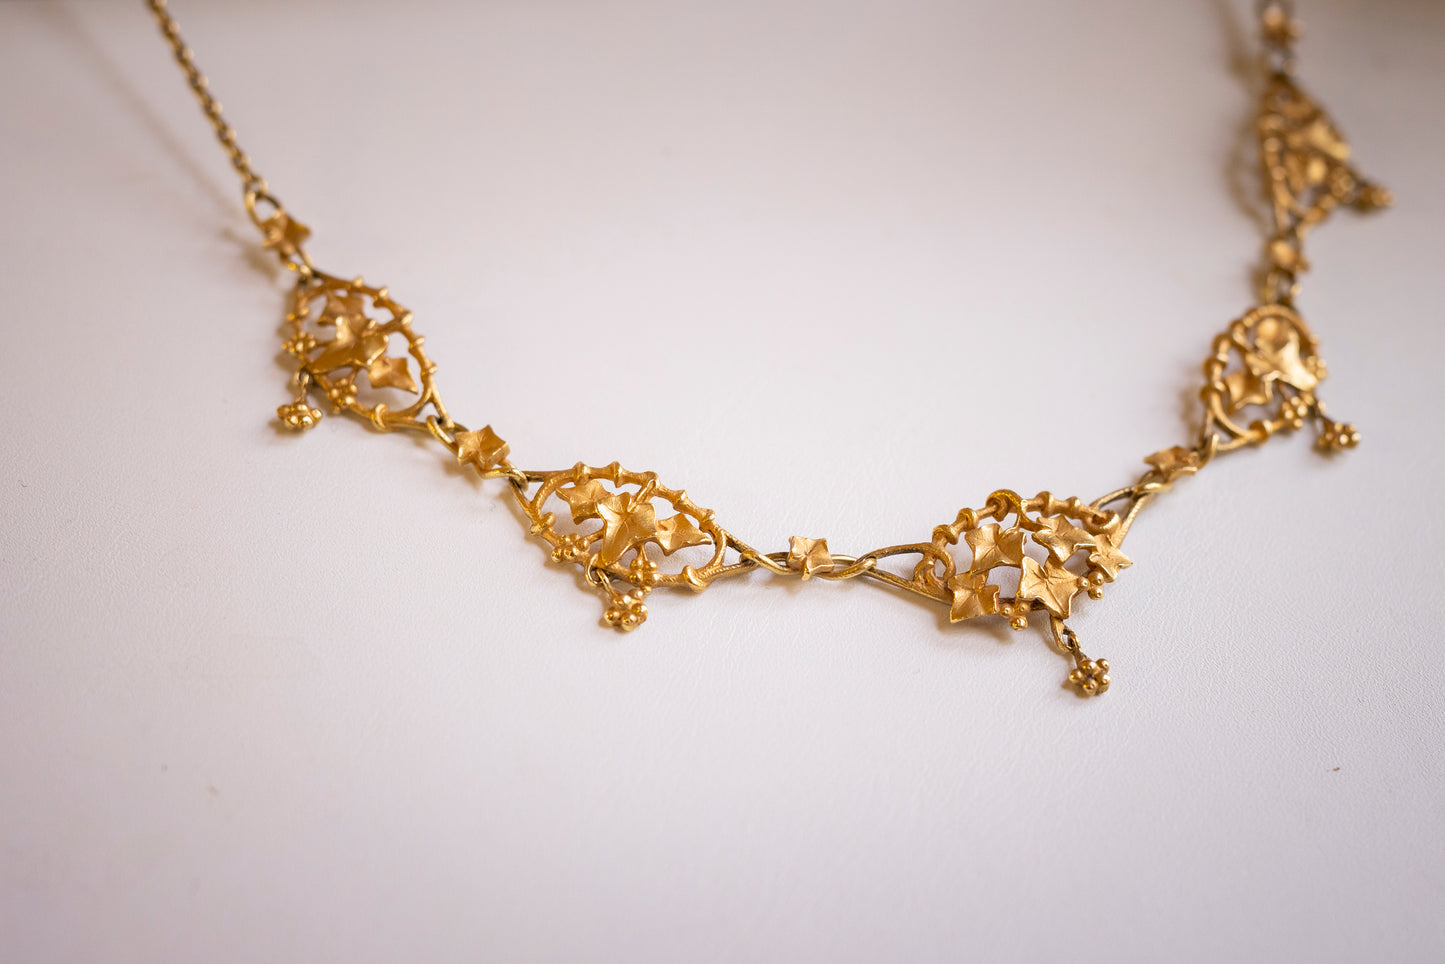 An art nouveau necklace made in France